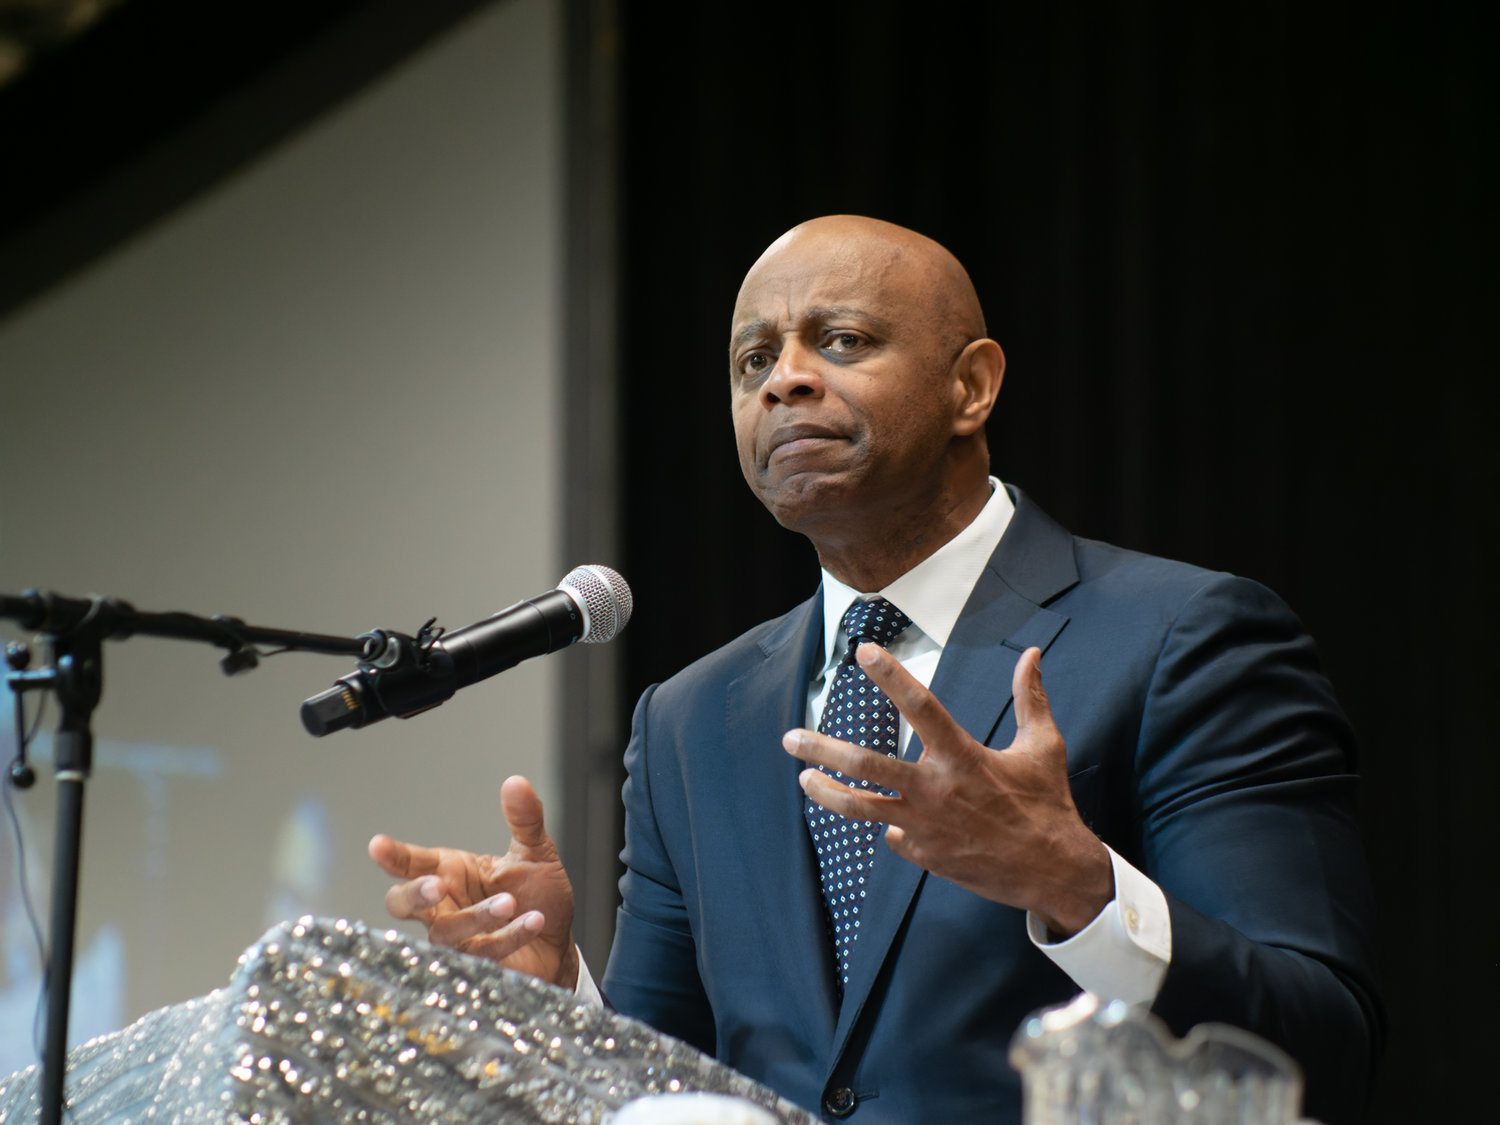 Dr. Eric Mansfield delivers the keynote address Monday during the 30th Martin Luther King Jr. Prayer Brunch at the Crown Exposition Center.